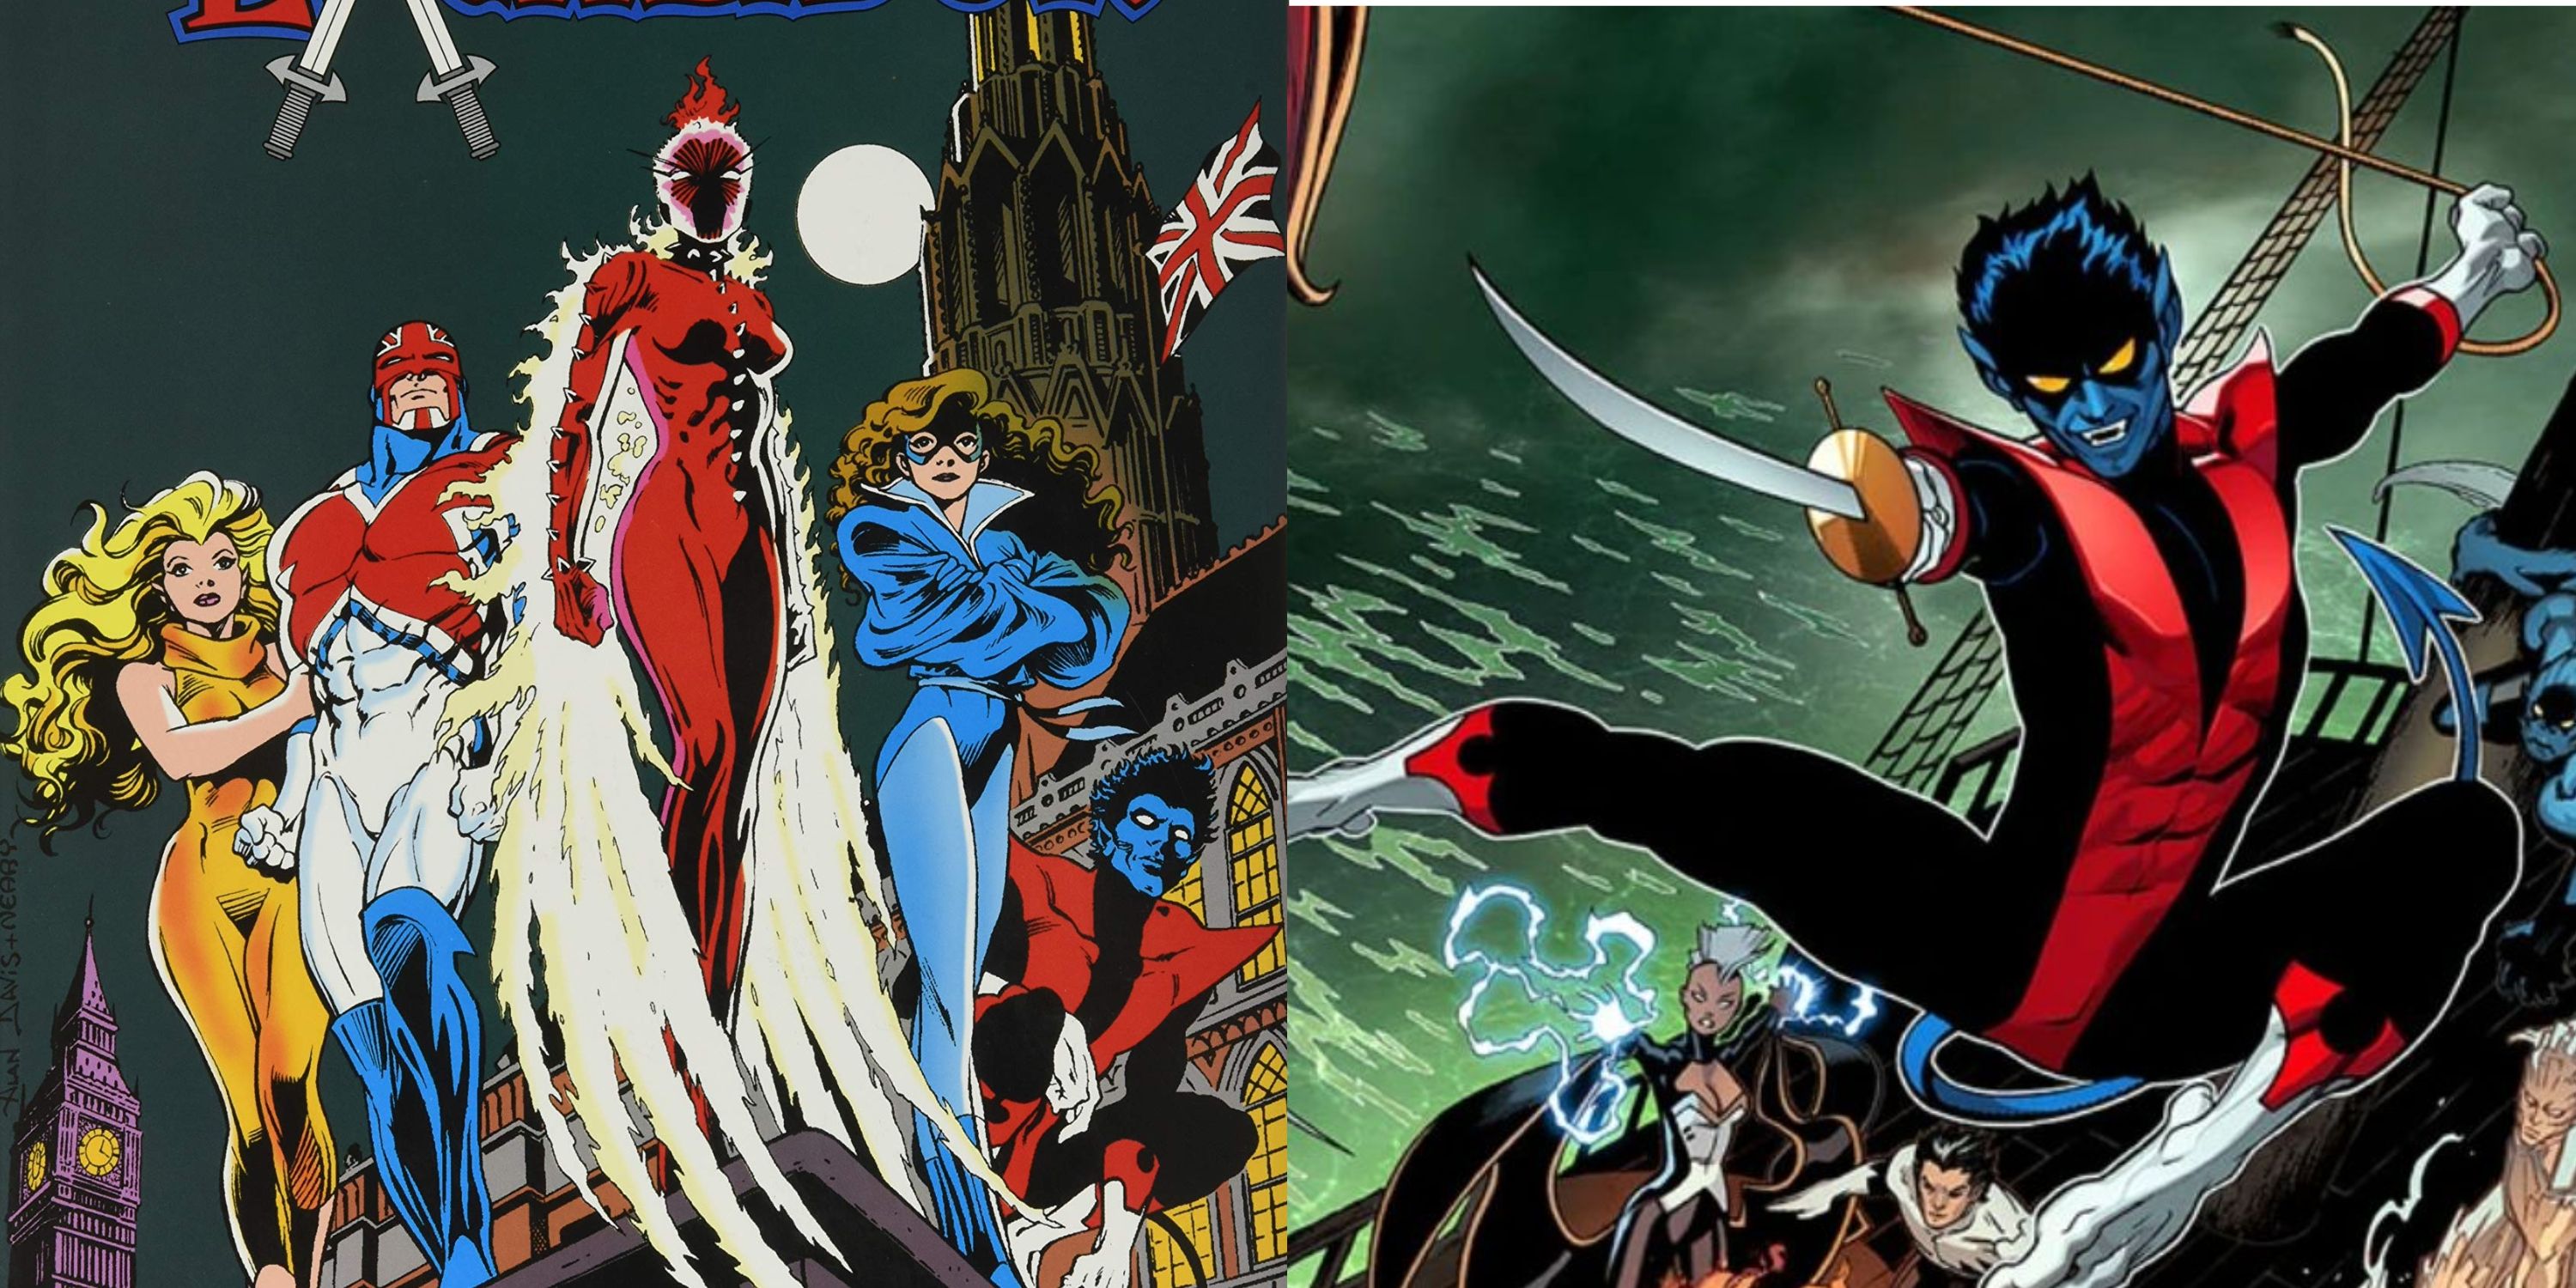 Excalibur #1 cover by Alan Davis and Nightcrawler by Ed McGuinness in Amazing X-Men (right)